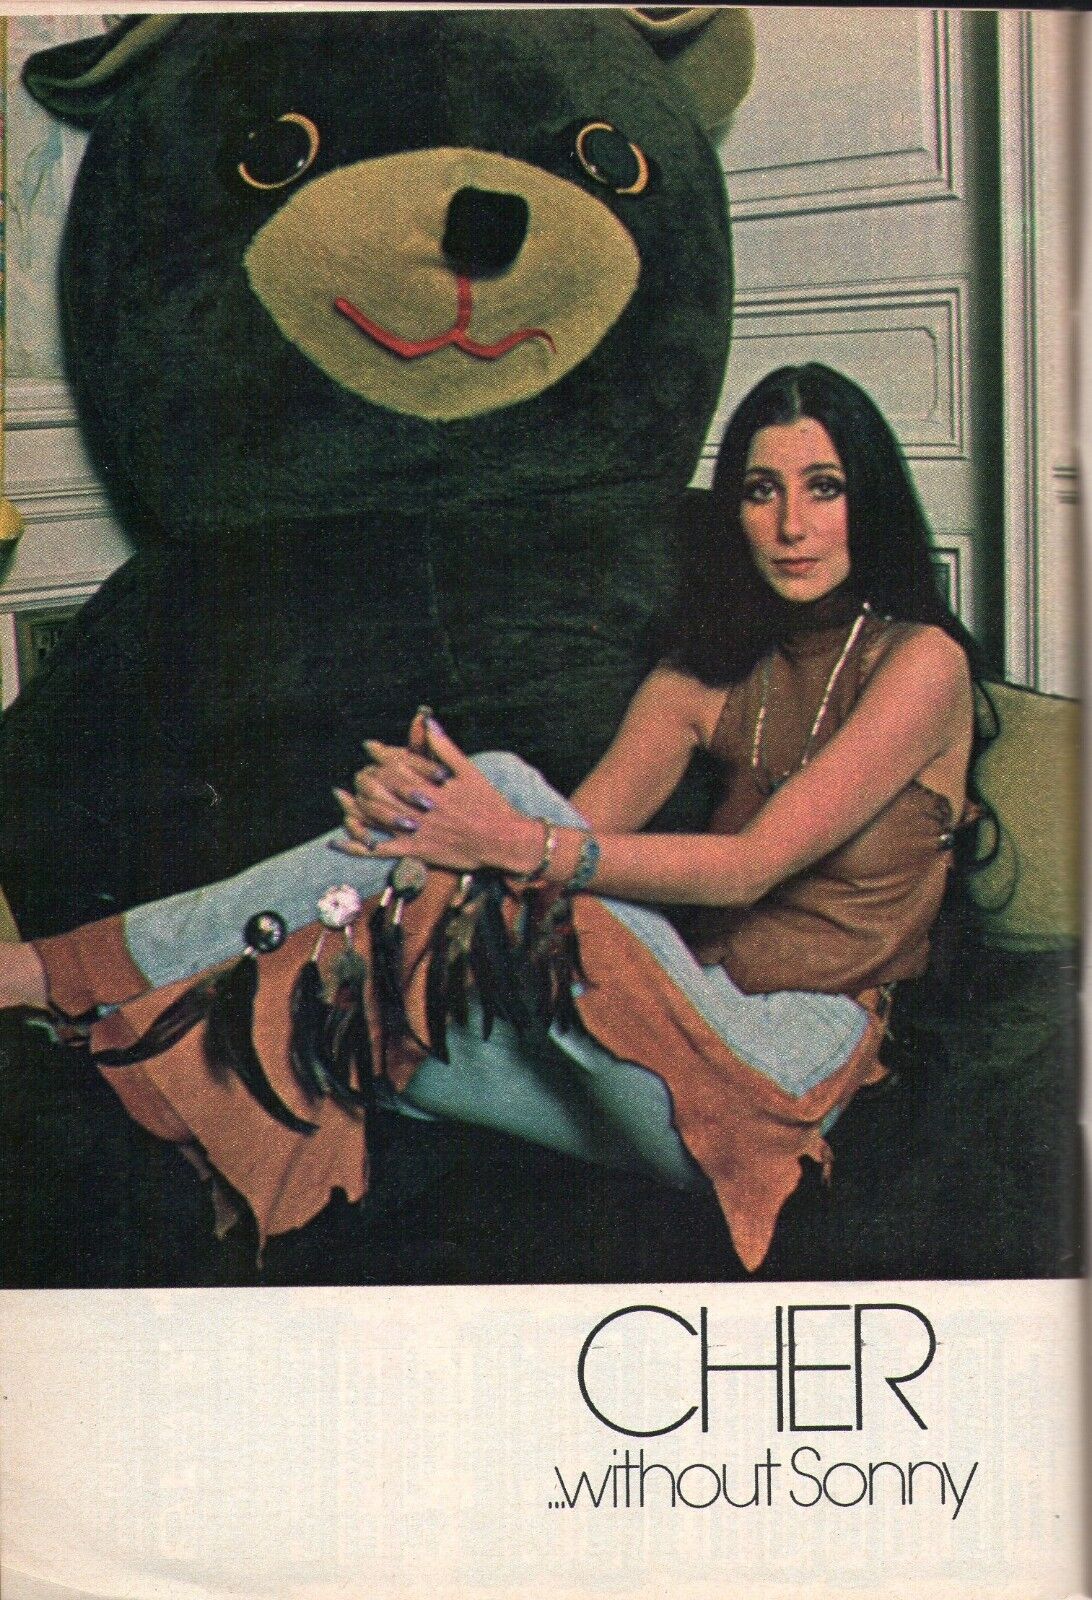 1975 TV ARTICLE CHER WITHOUT SONNY 4 PAGES BIG TEDDY BEAR MESSY DIVORCE